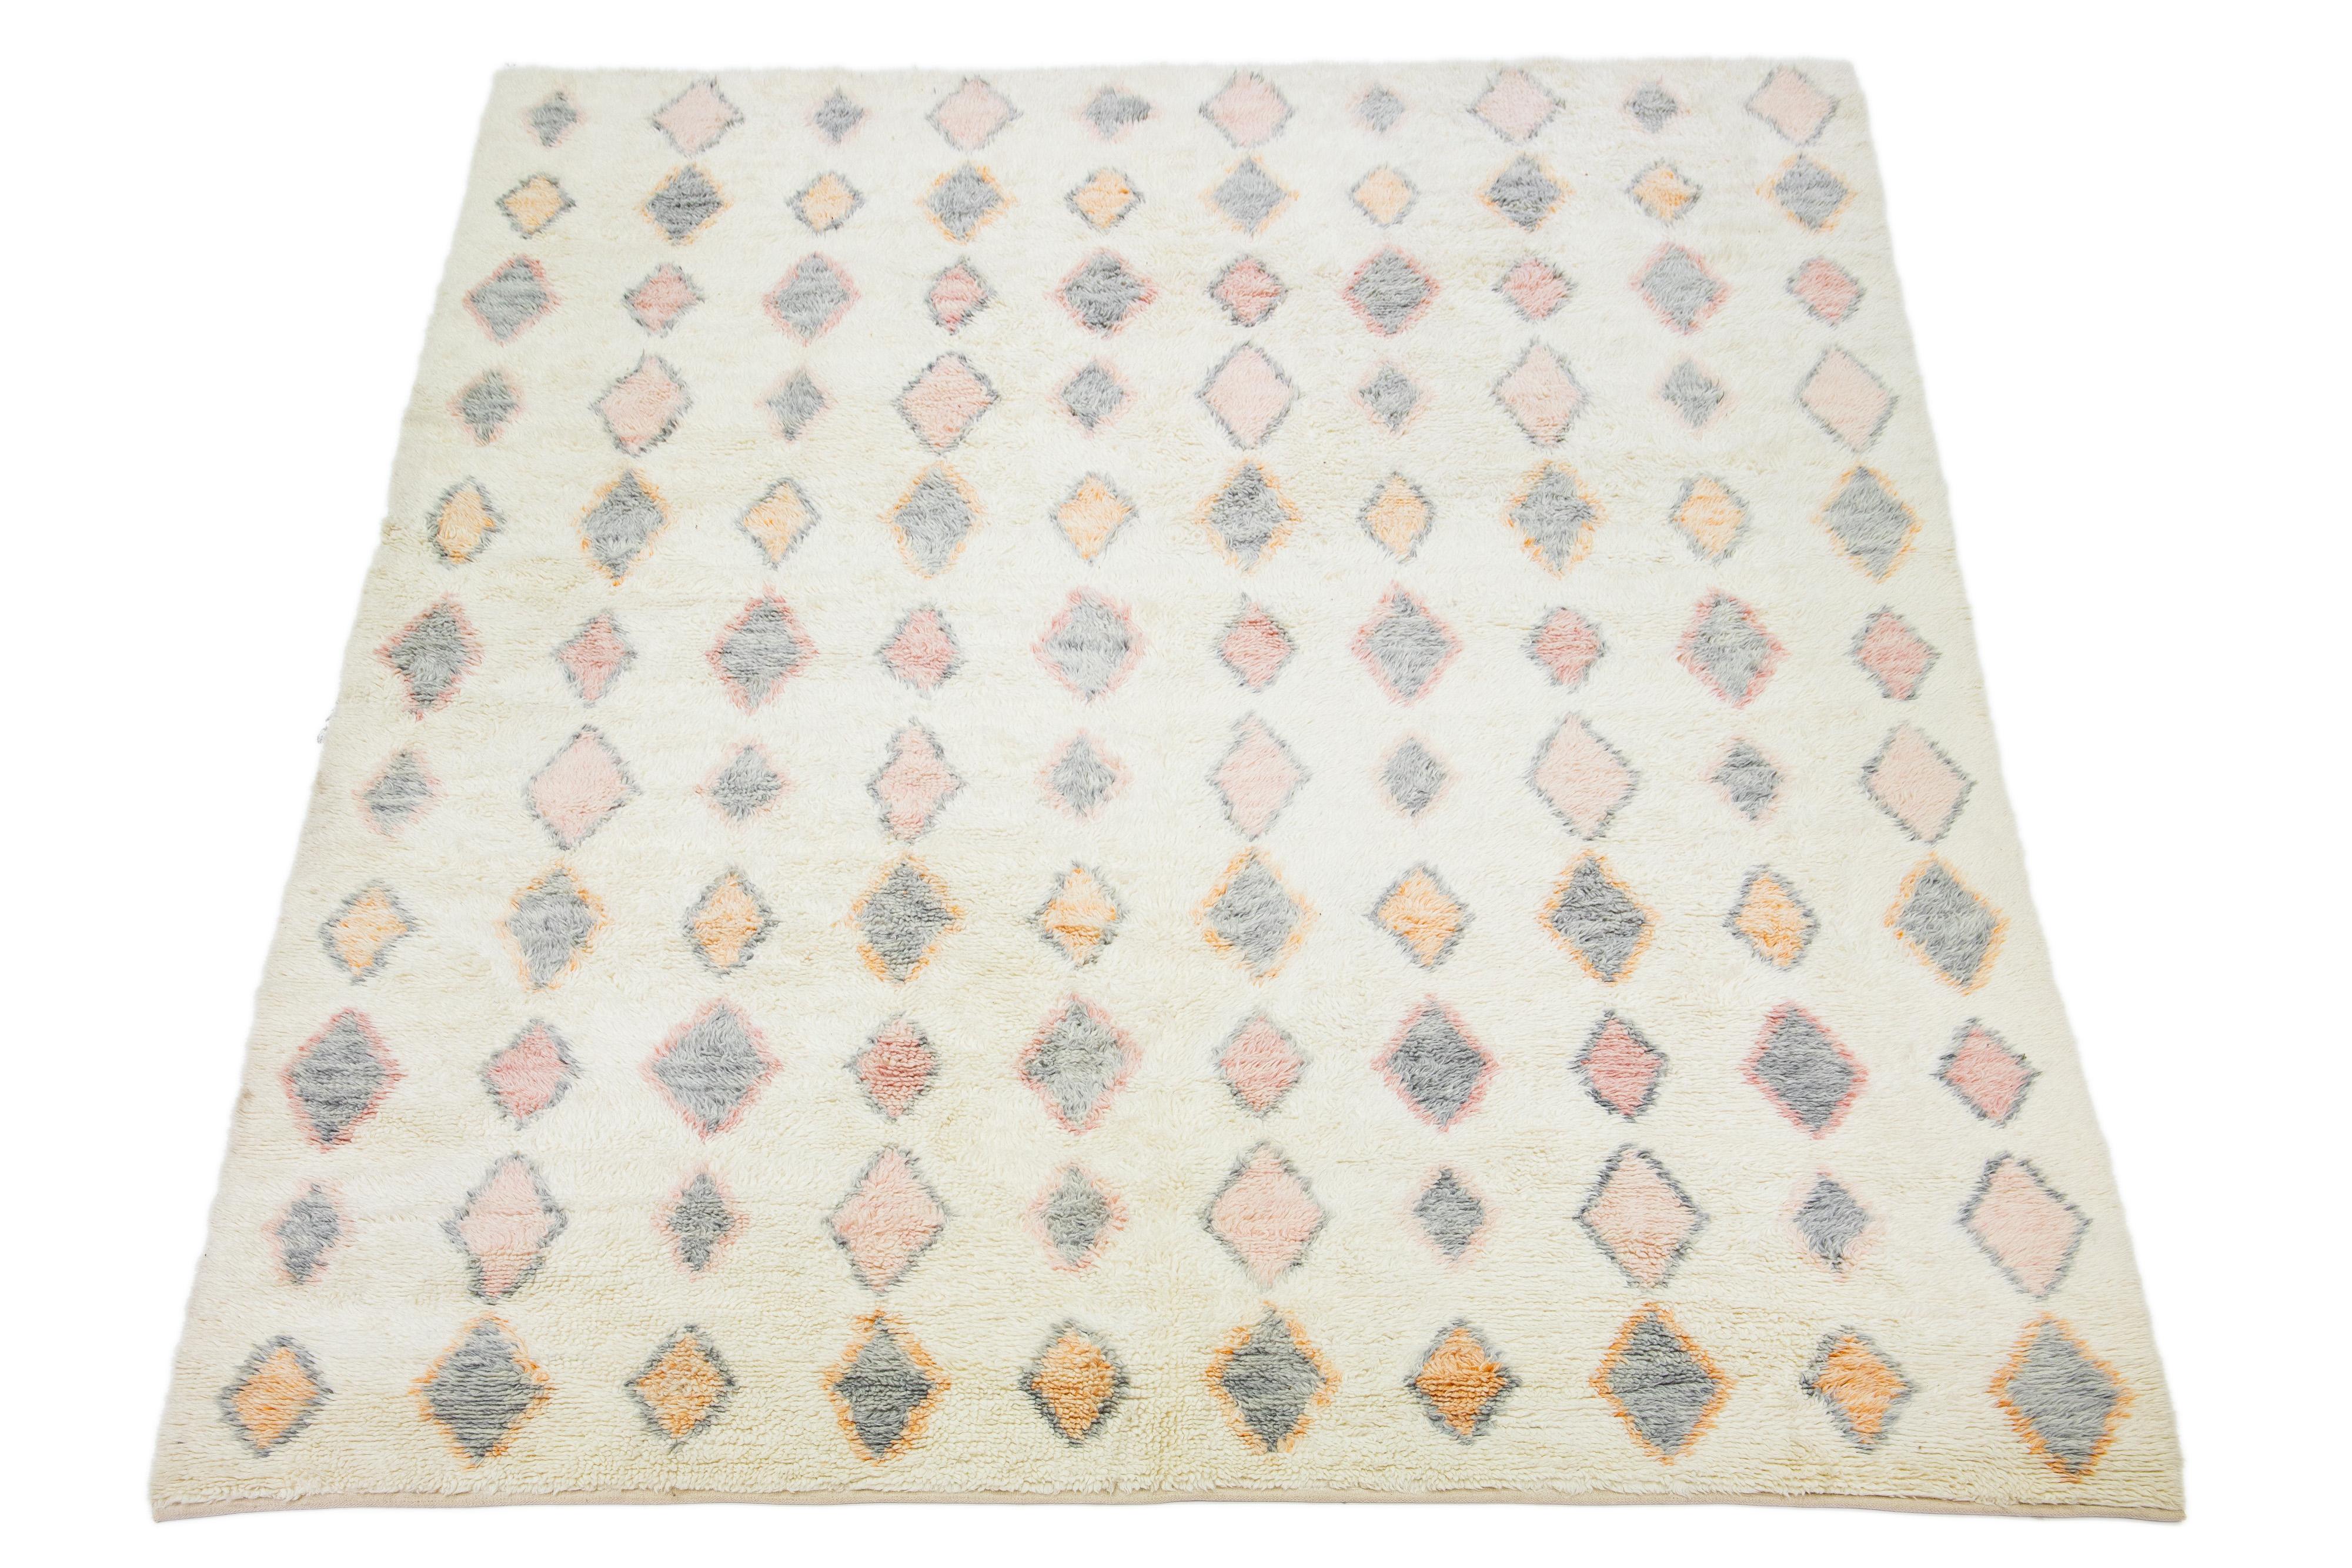 The shaggy rug, hand-knotted and crafted from organic wool, embodies a stylish Moroccan design. It features a captivating ivory-toned background with multicolor accents.

This rug measures 11'2